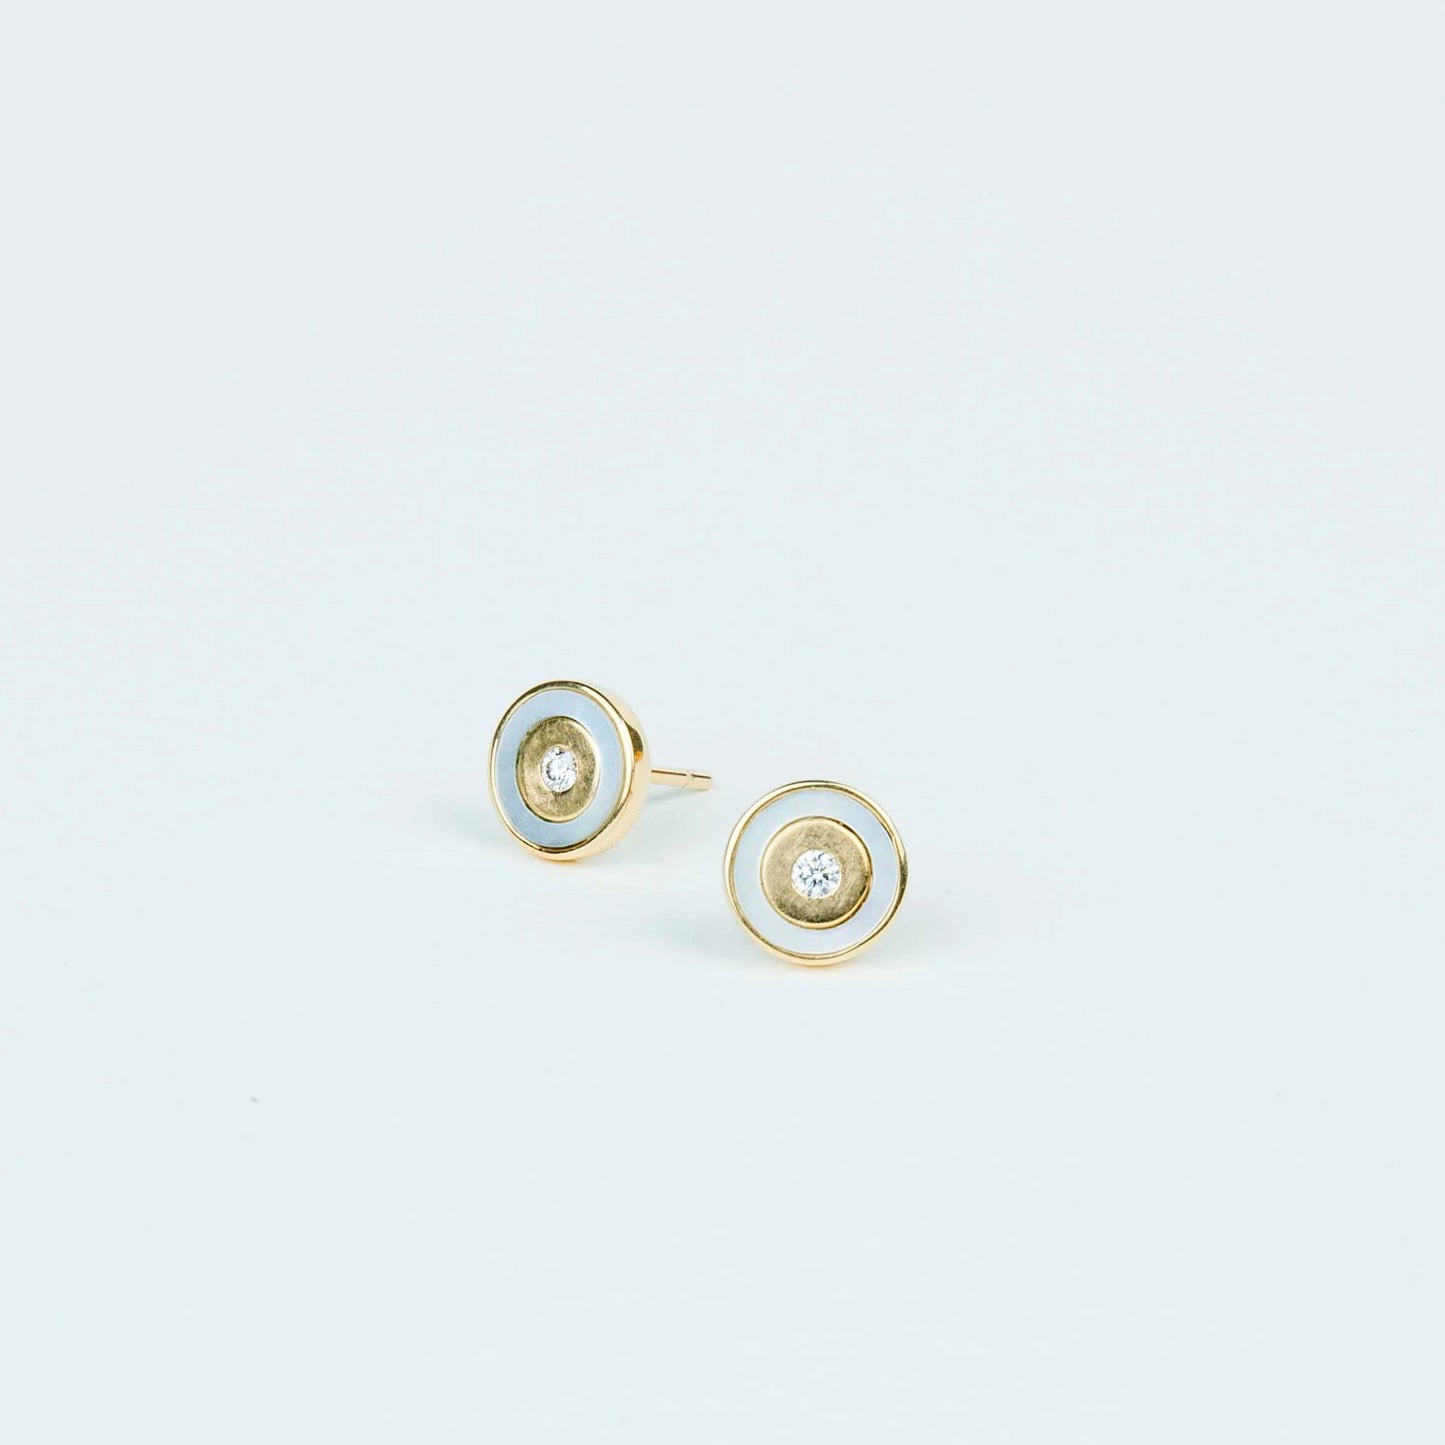 PS ILY ETERNITY EARRINGS IN MOTHER OF PEARL OR ONYX INLAY